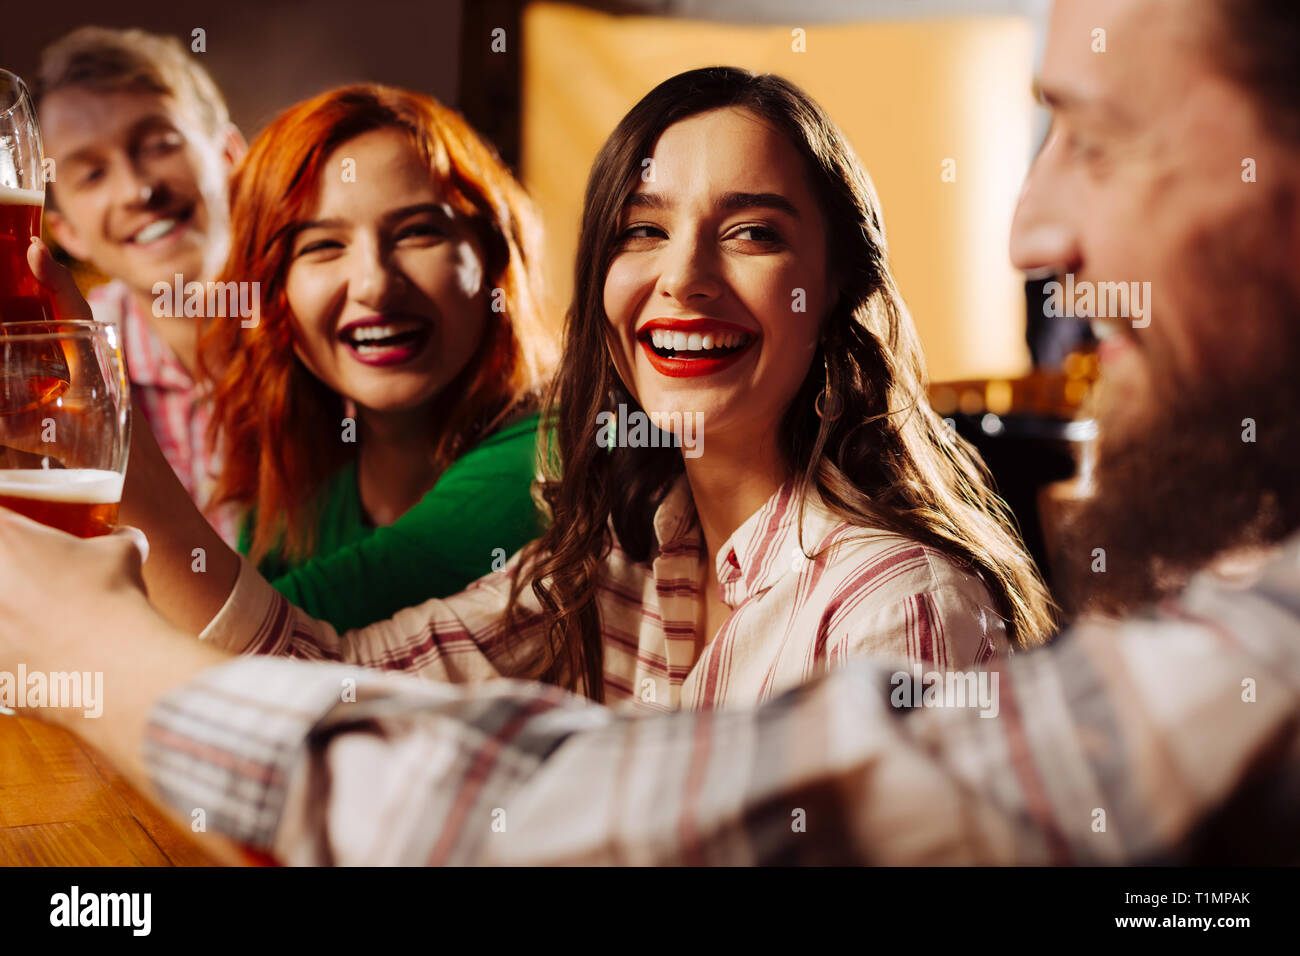 Women spending night with their boyfriends in the bar Stock Photo